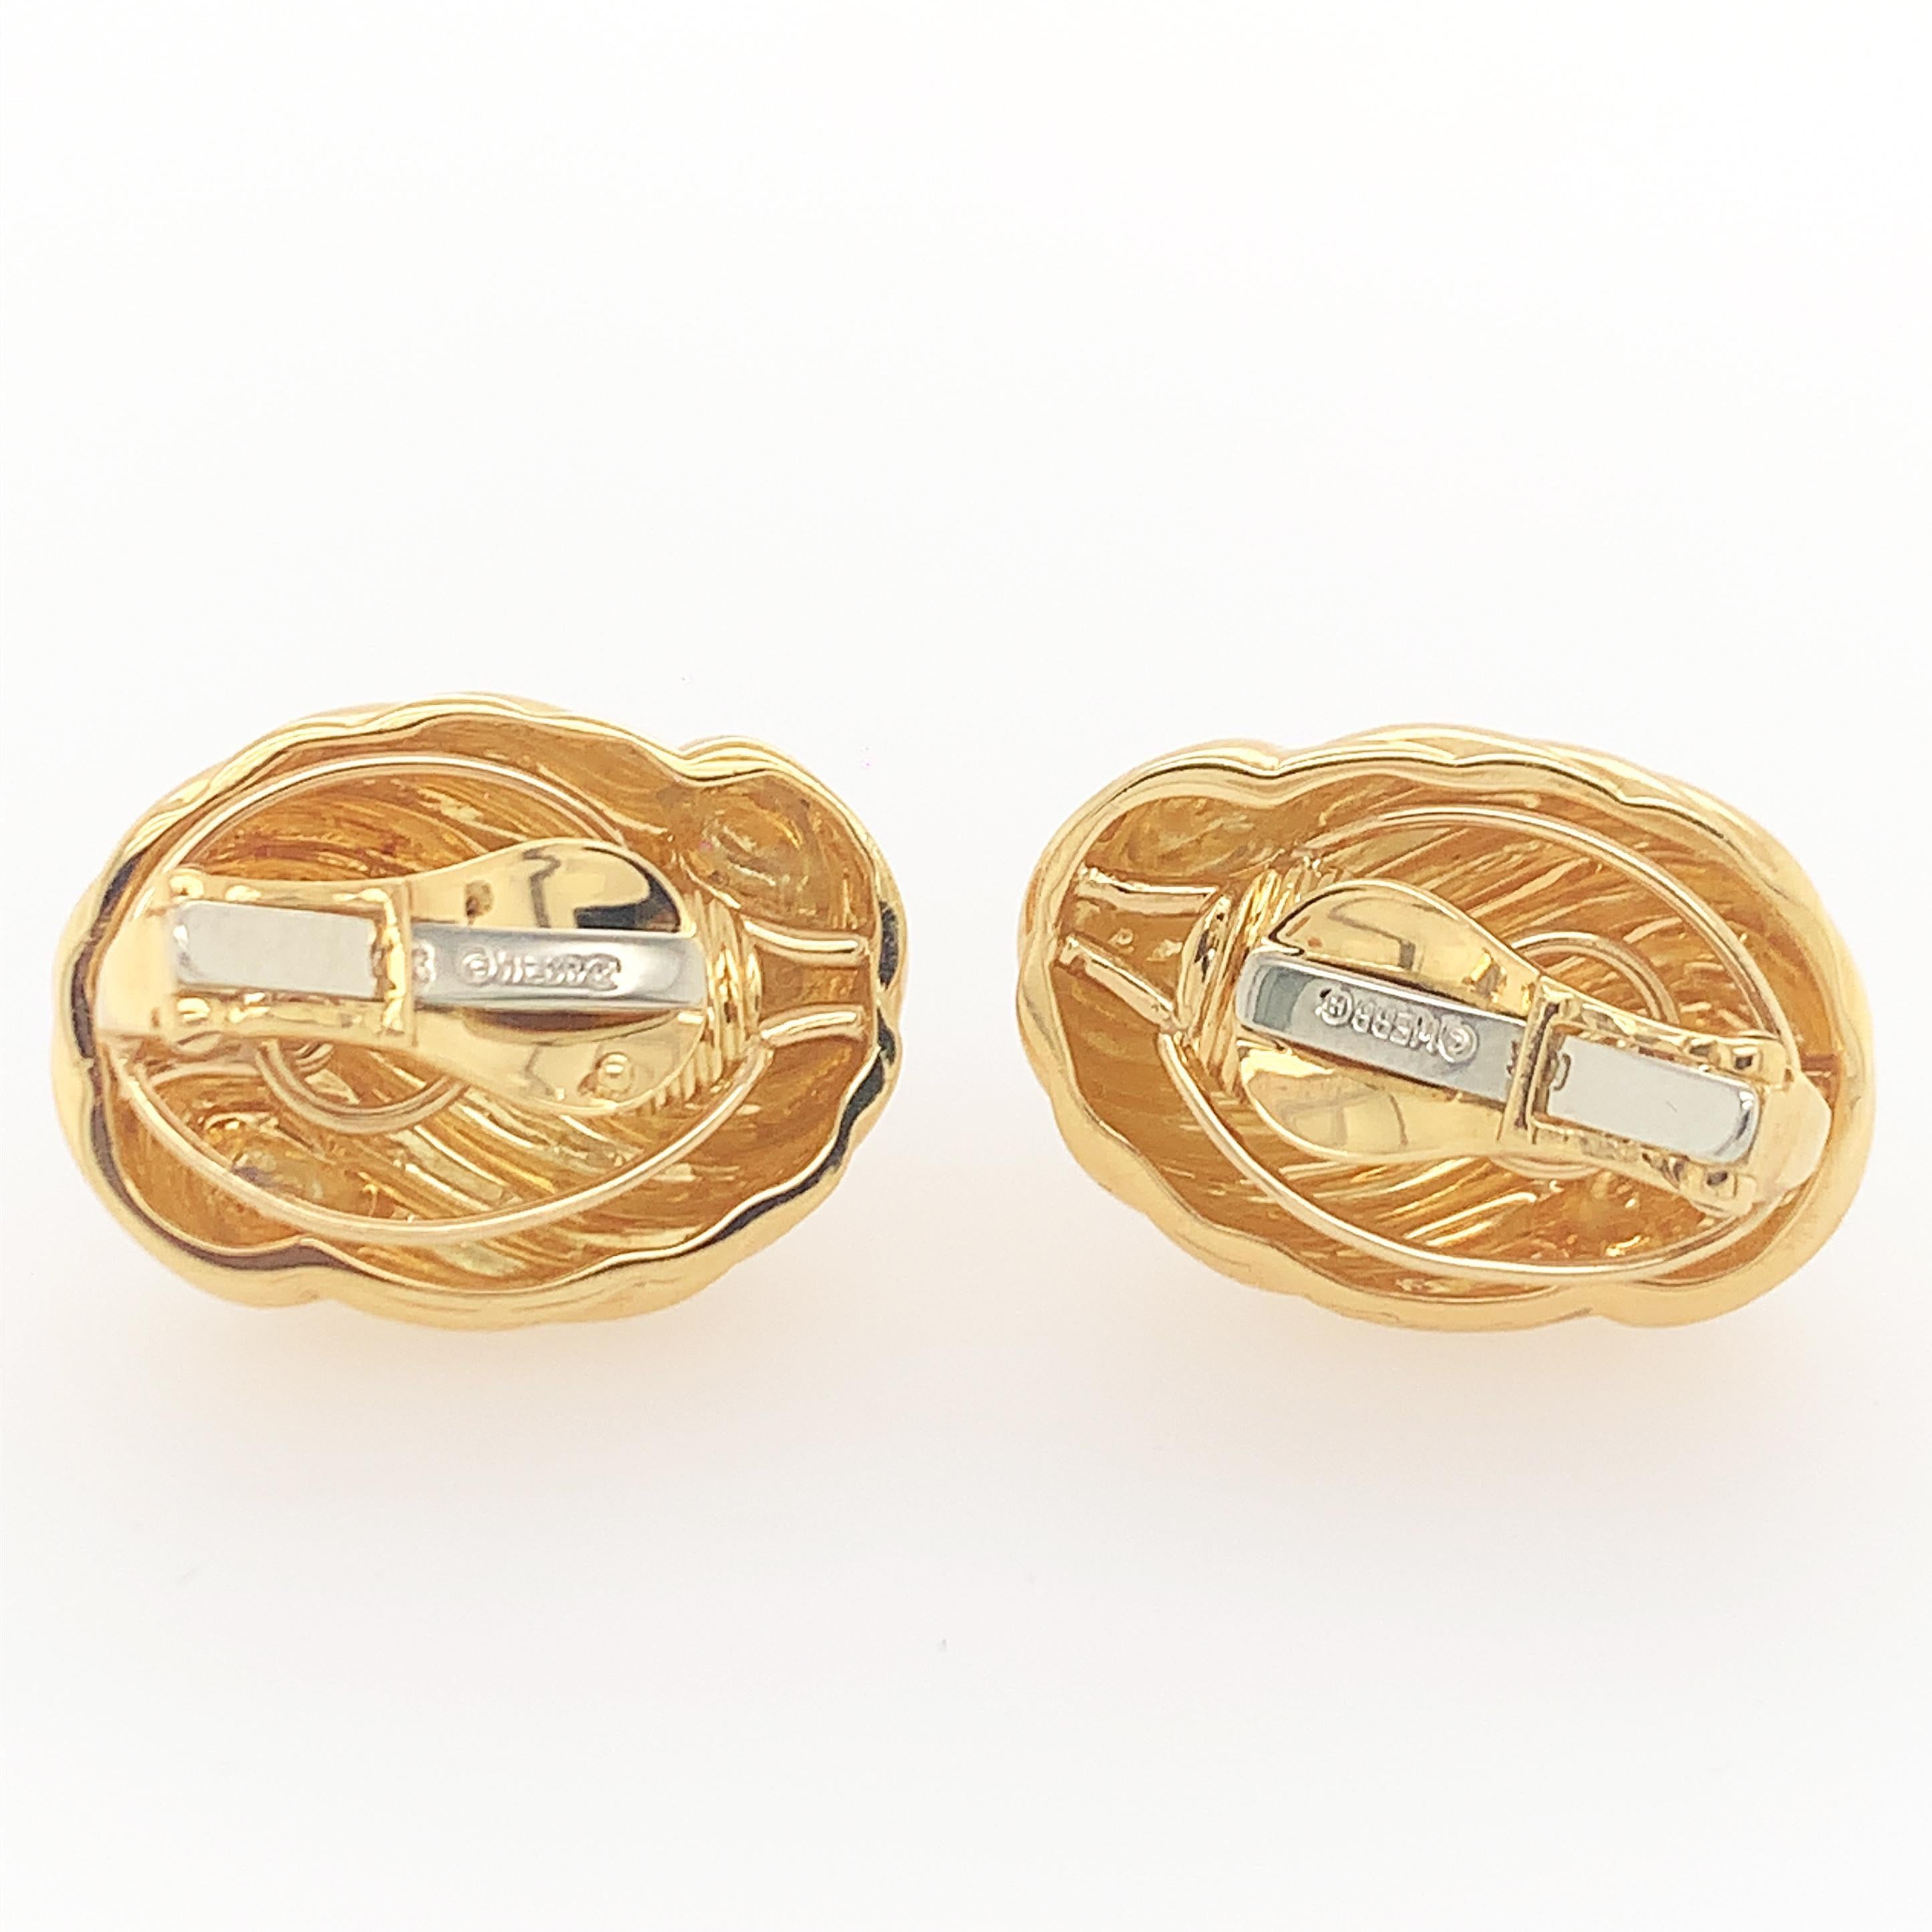 18K Y/gold earclips, stamps Webb 18K measures 1 1/8 x 3/4 inch, weight 17.1 dwt.